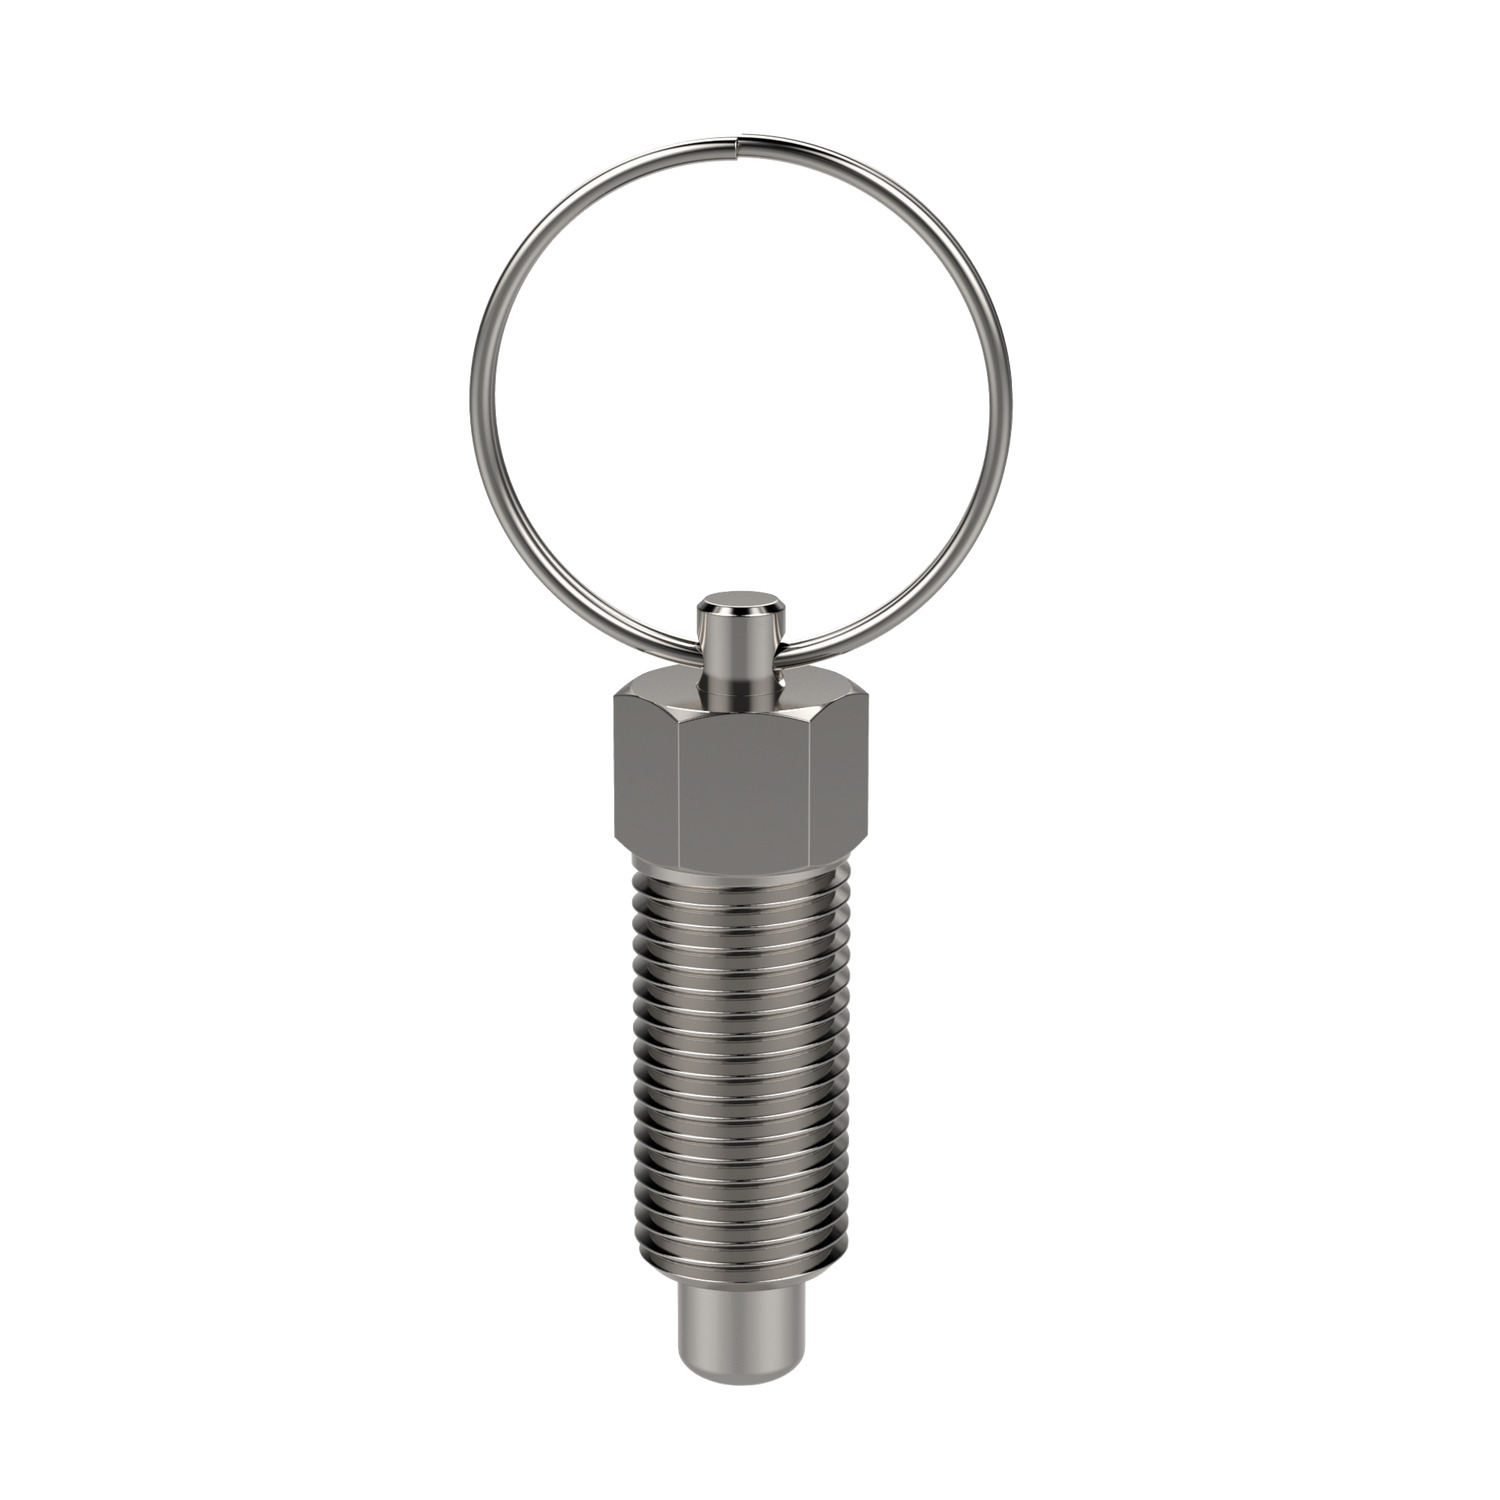 Index Plungers - Pull Ring Pull ring, non-locking index plungers with coarse thread. Made from stainless steel (AISI 303 and 301). Suitable for applications where high precision is not required.